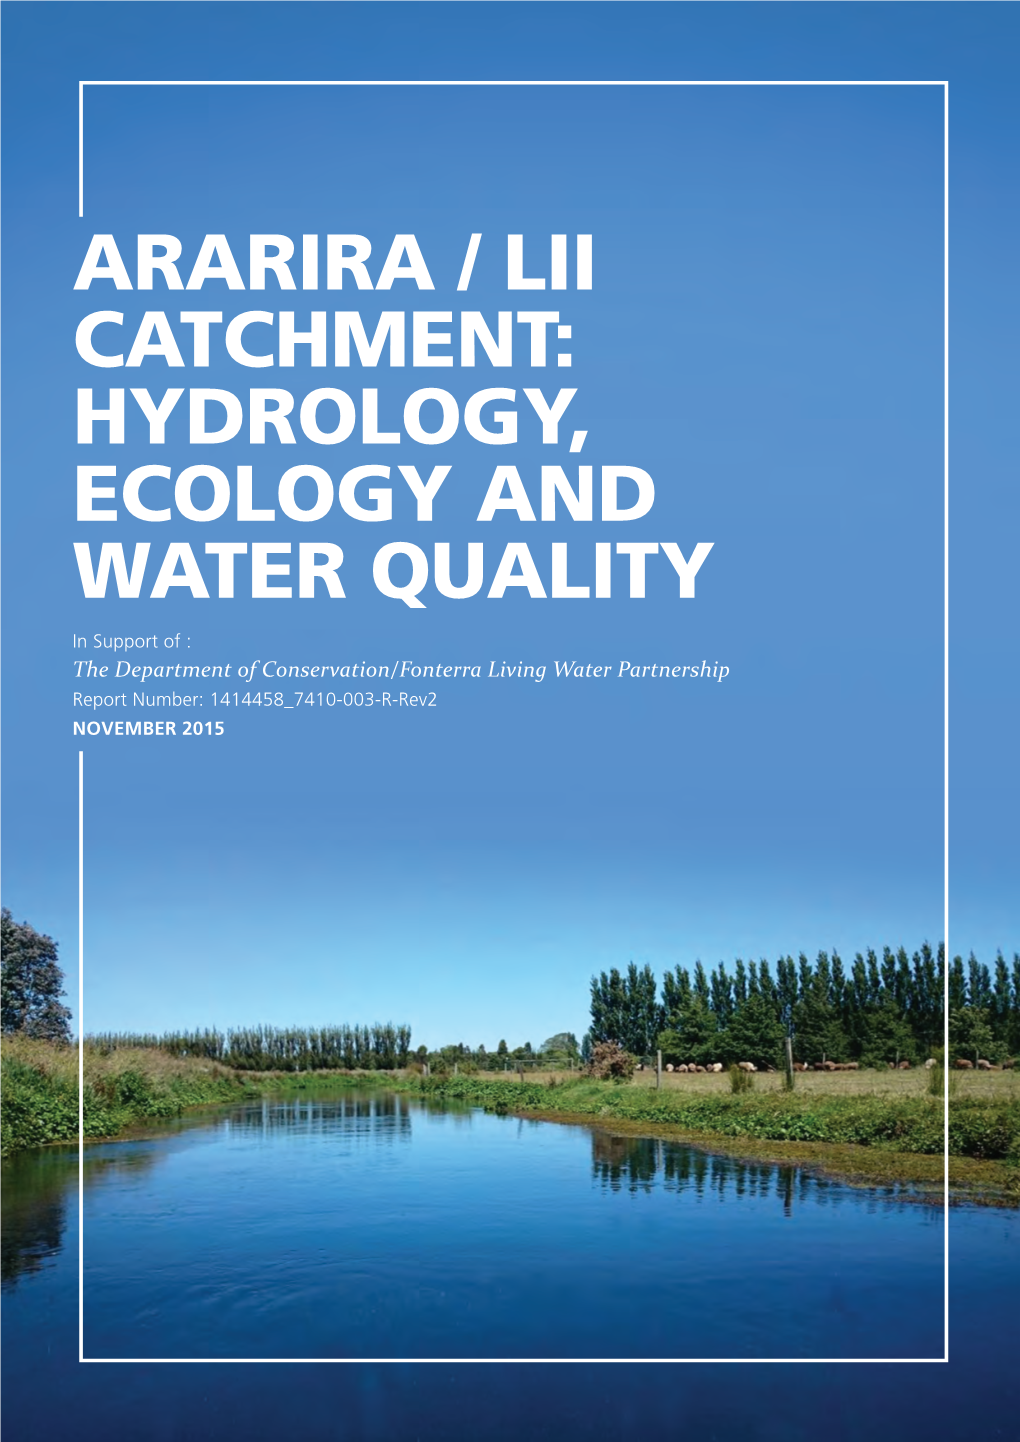 Ararira / Lii Catchment: Hydrology, Ecology And